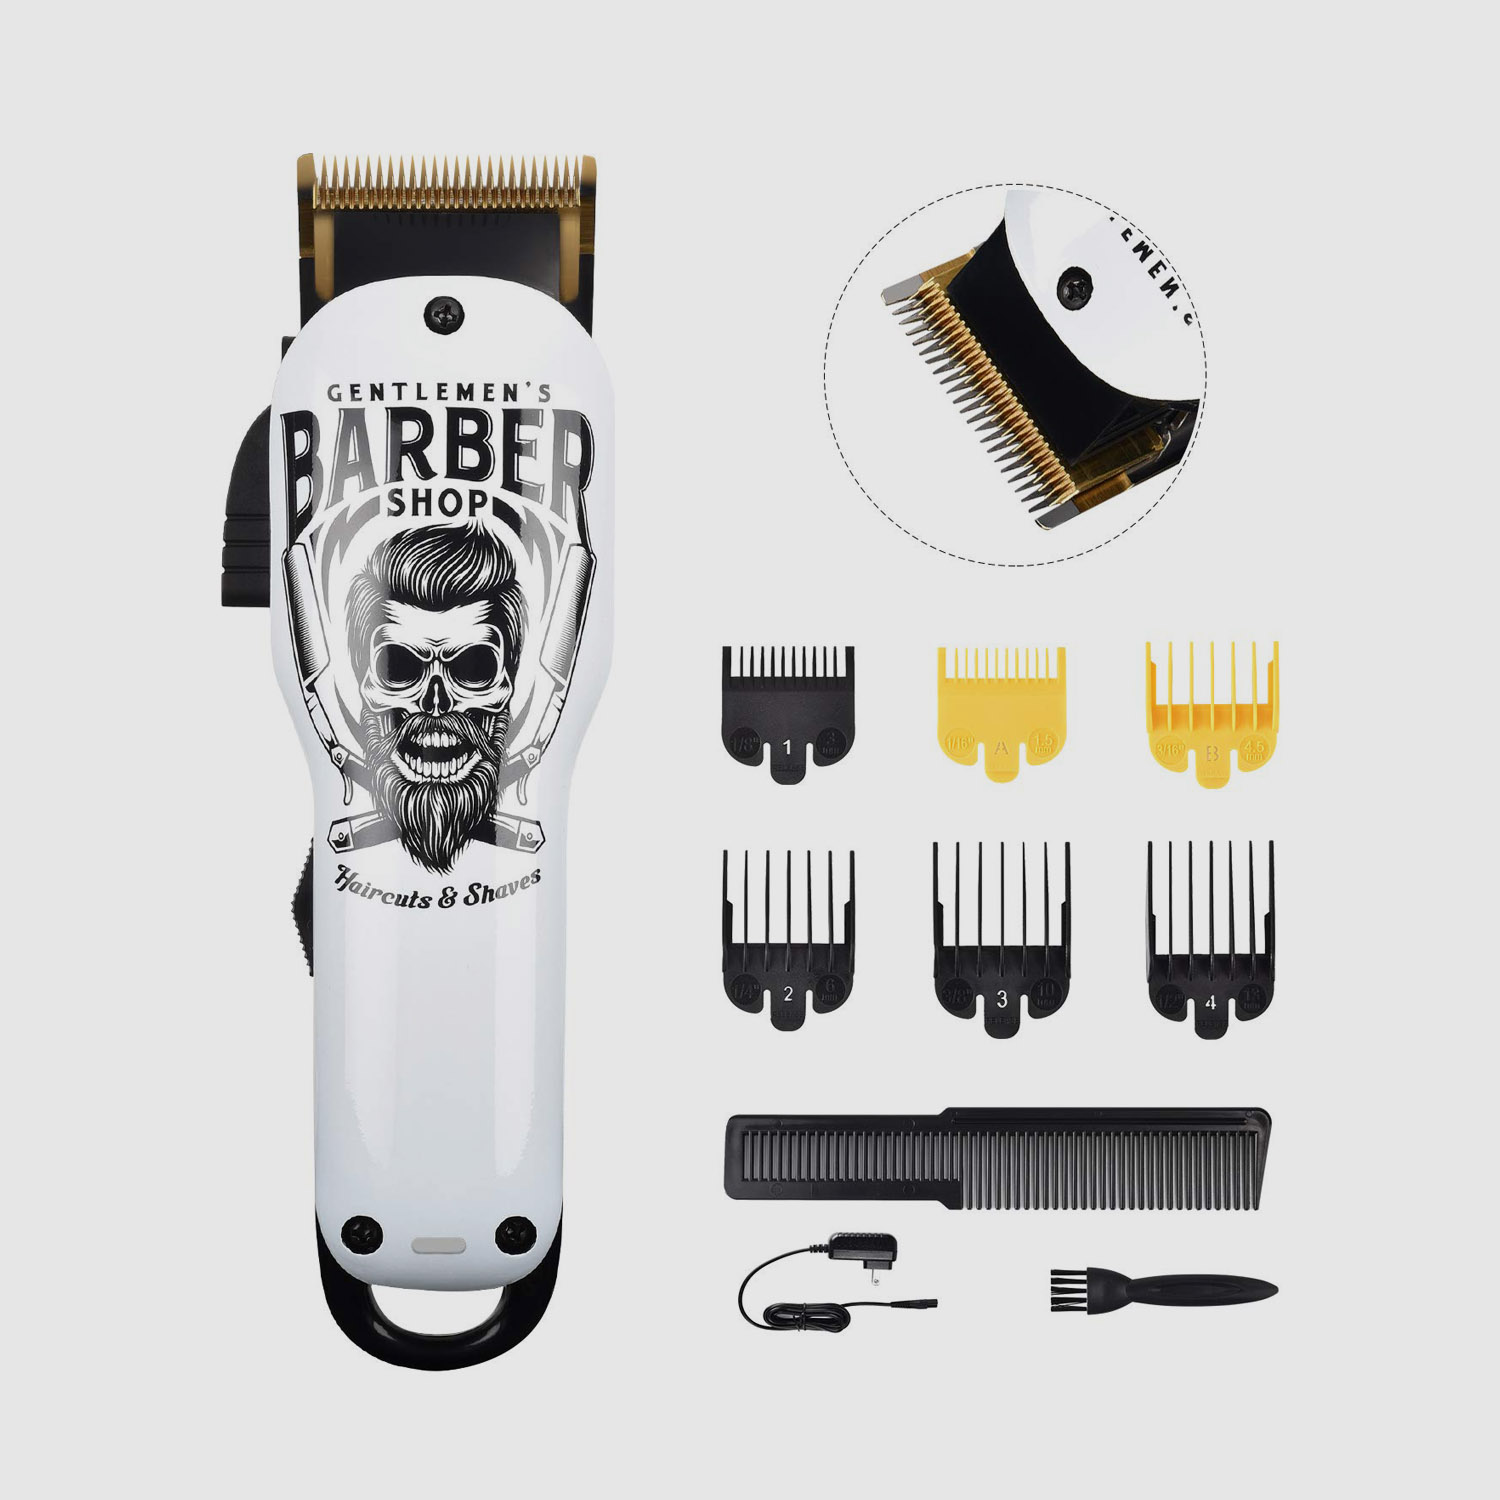 Aspects associated with cordless hair clippers